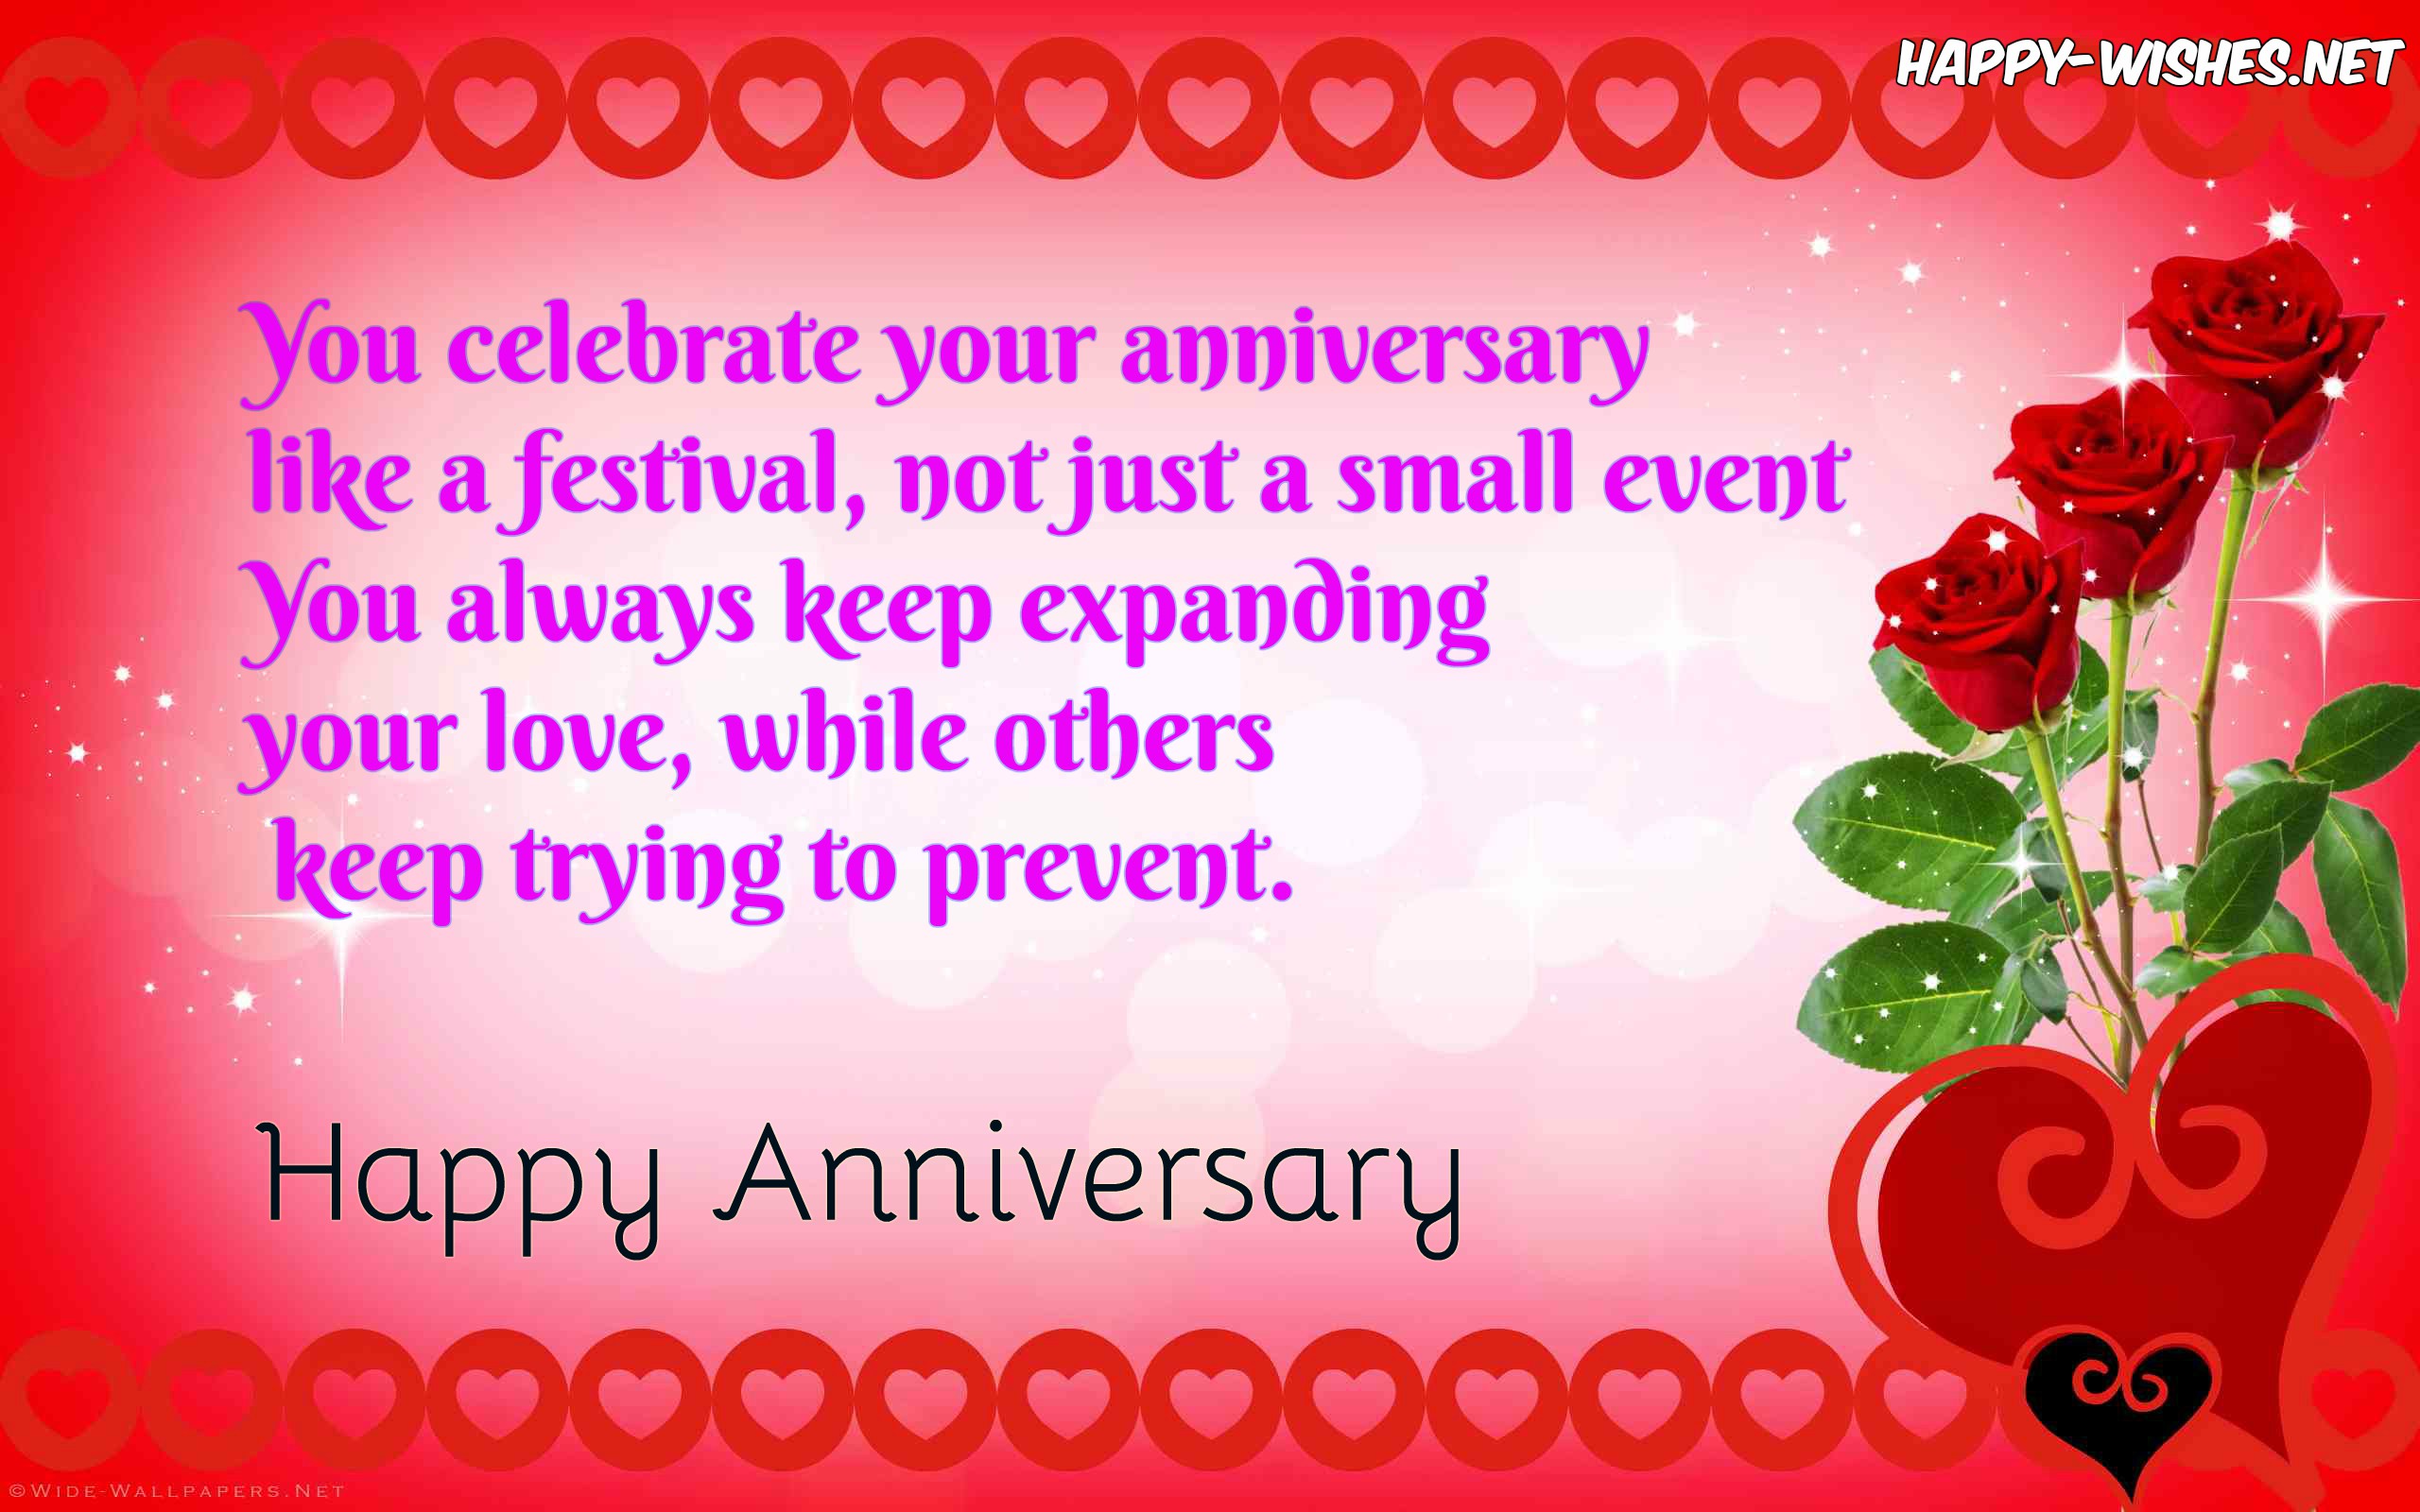 Best Happy Anniversary Congratulation Wishes - Backgrounds With Rose & Hearts - HD Wallpaper 